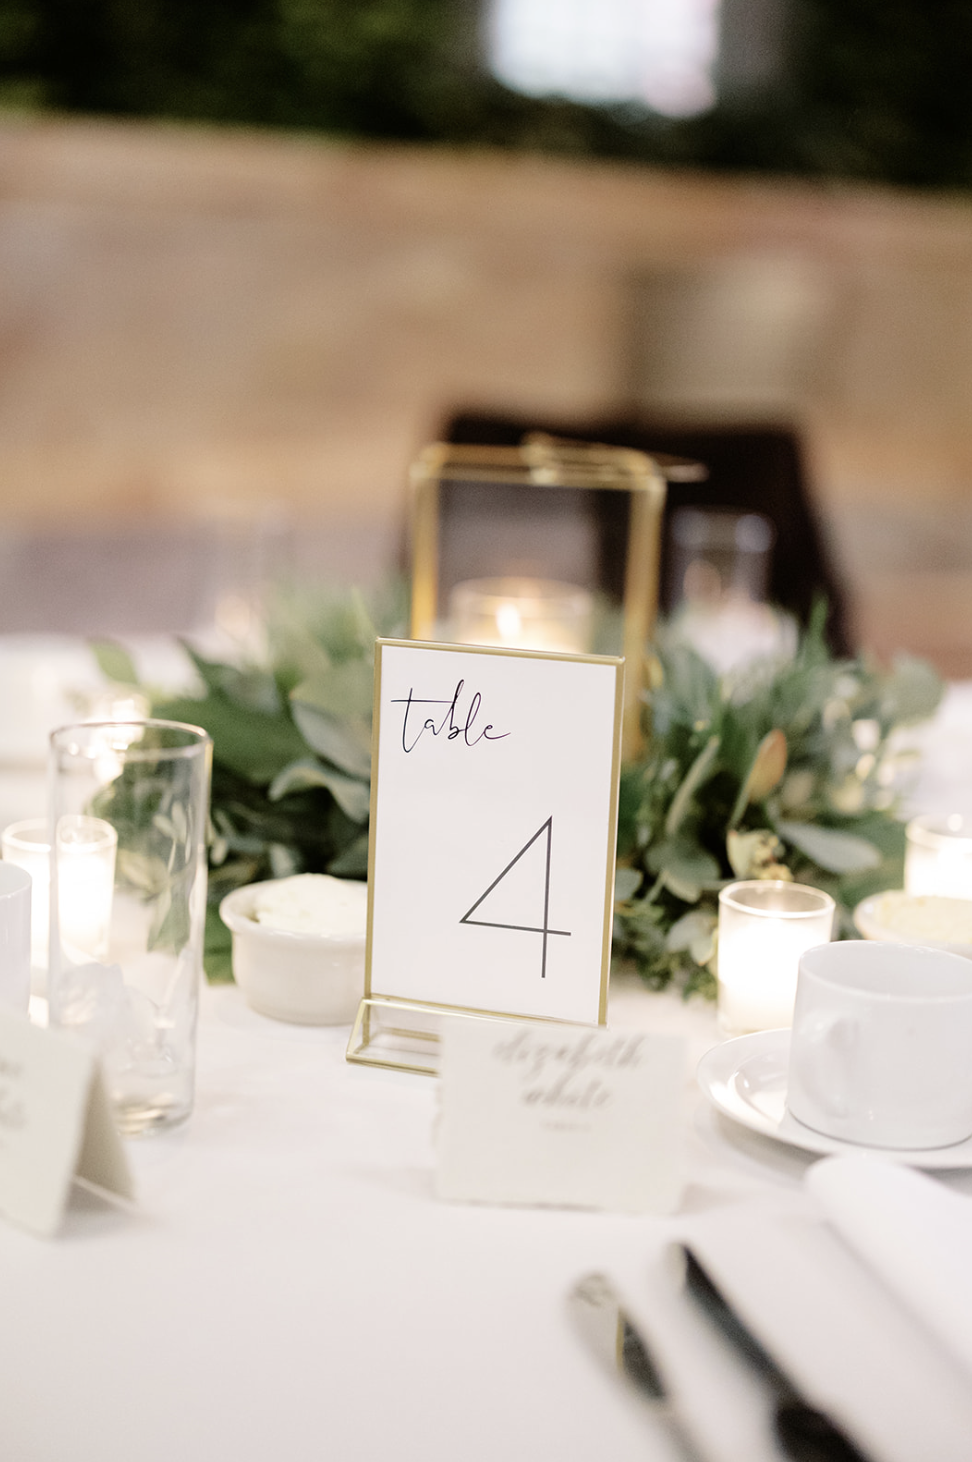 Gold and white decorations accompanied by minimalist table numbers and name cards are paired with lanterns and glass tea lights for elegant wedding reception centerpieces.